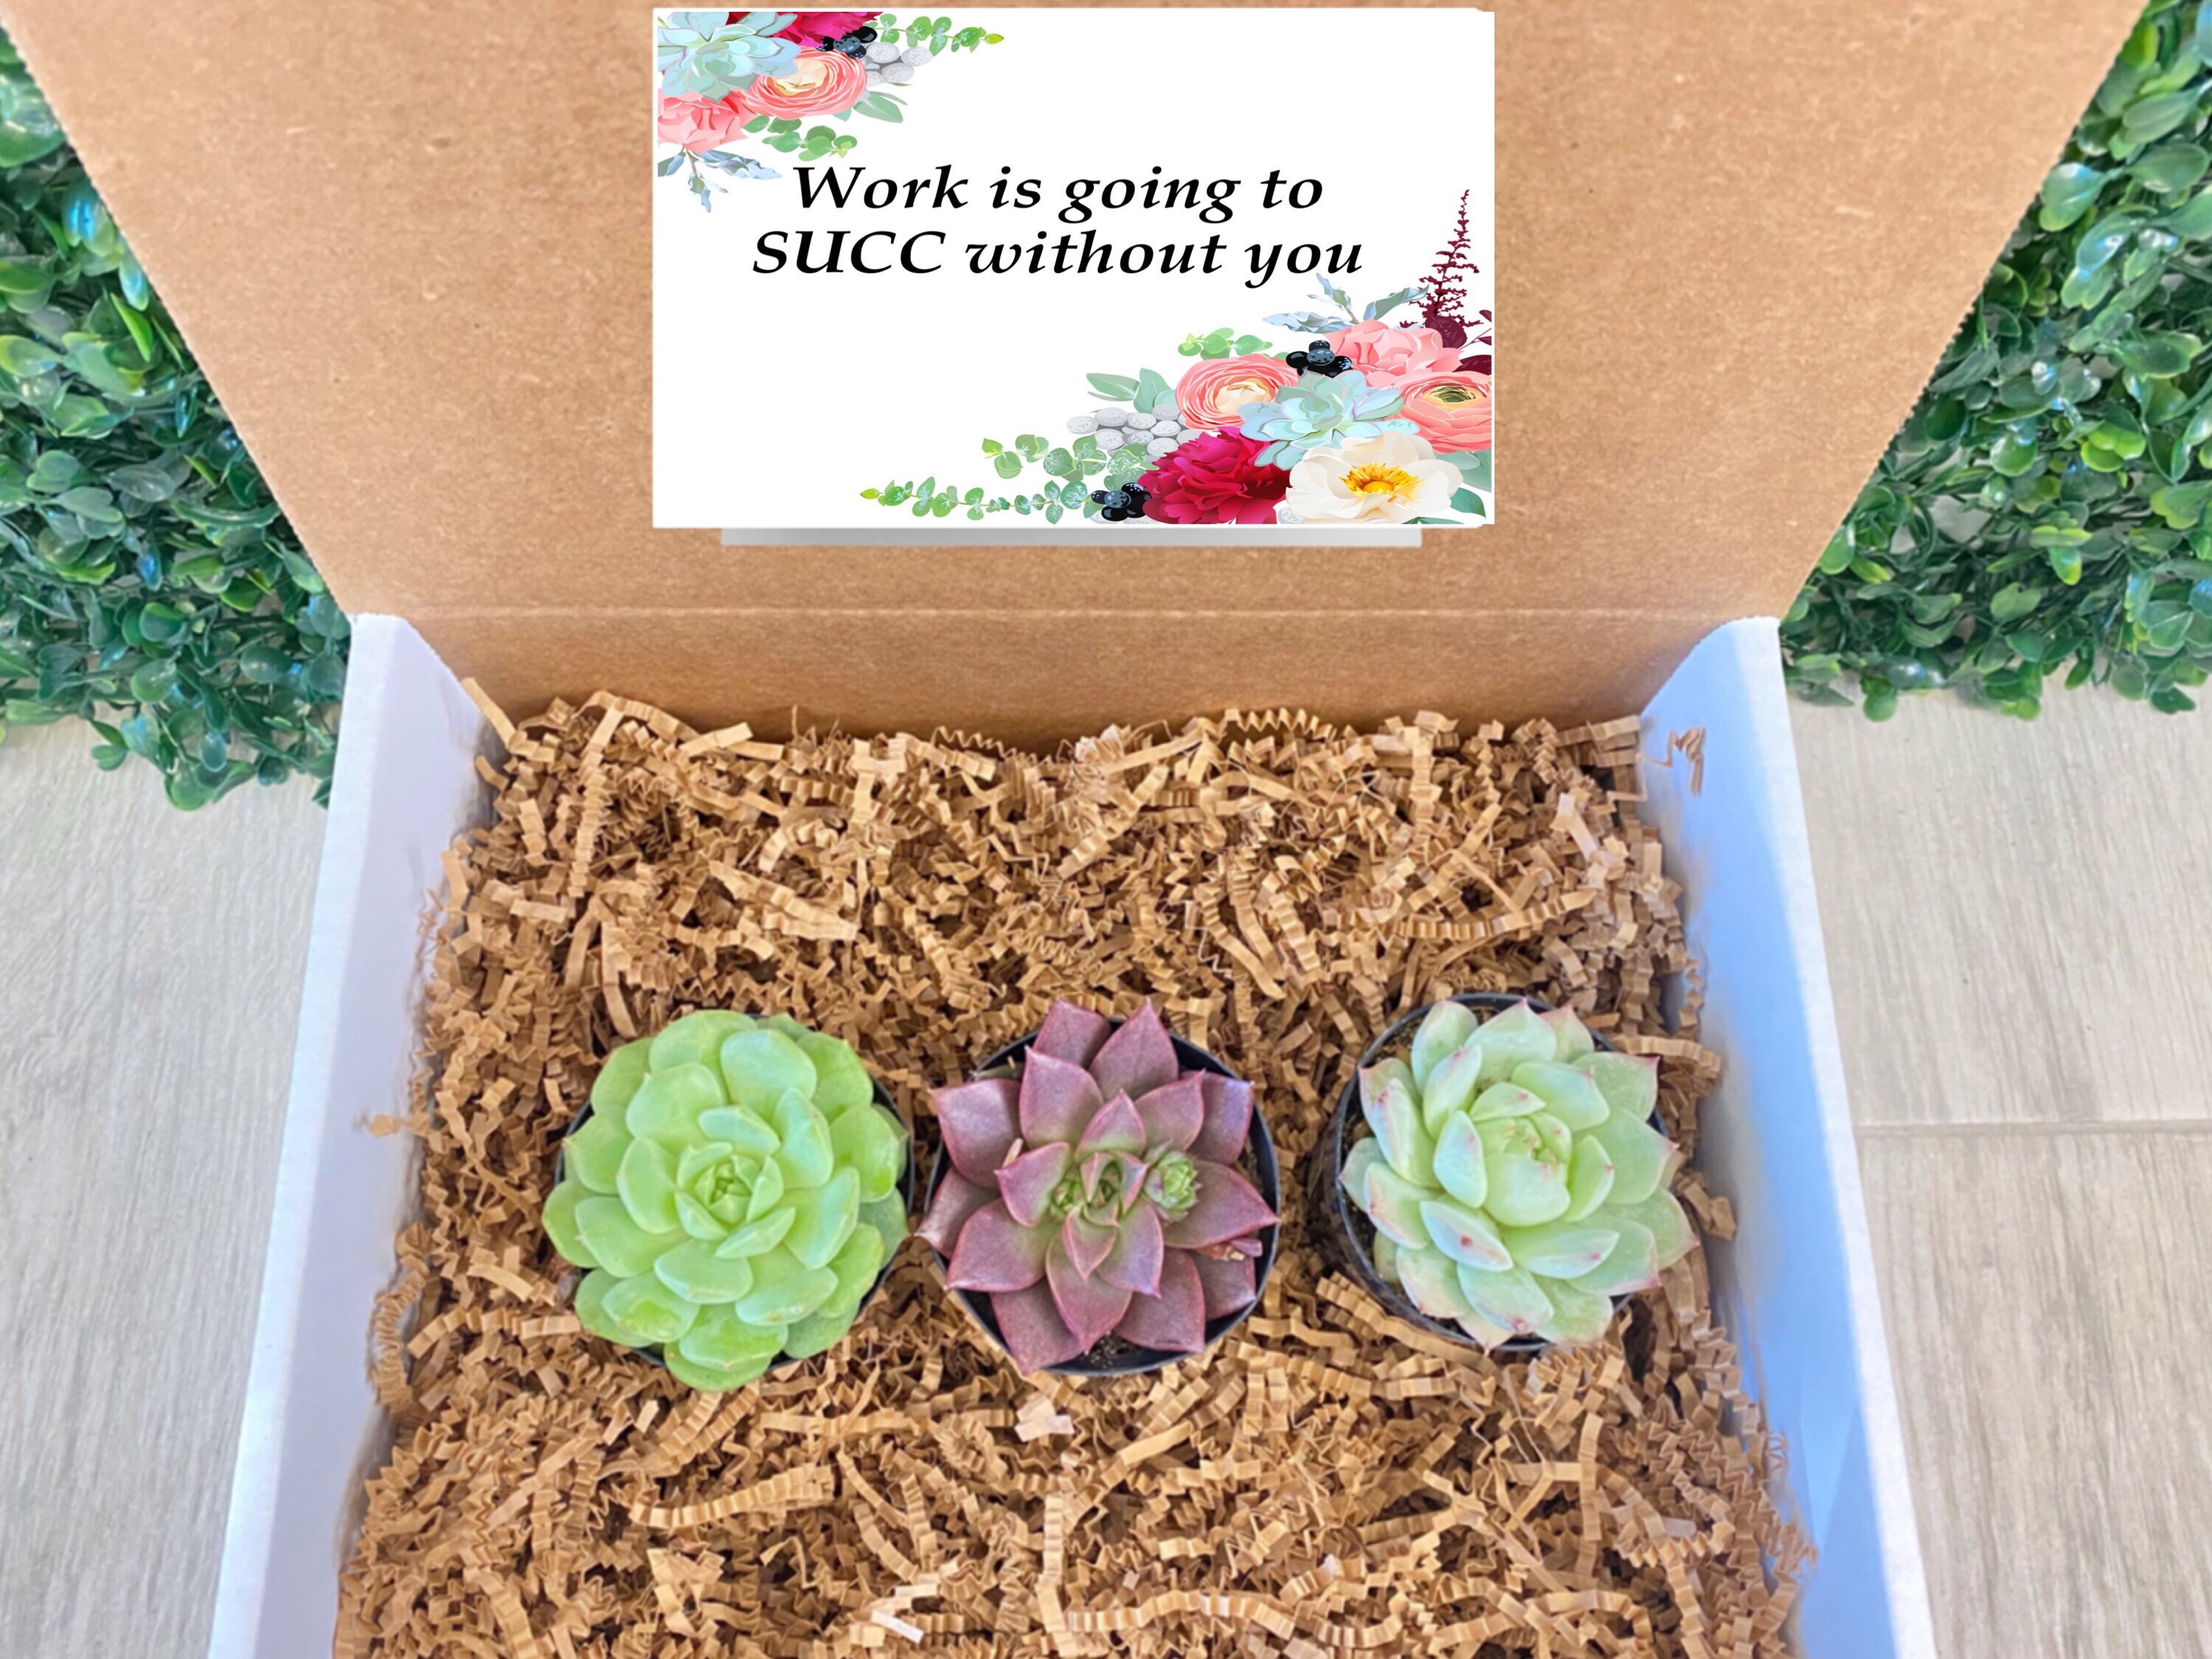 work-is-going-to-succ-without-you-succulents-card-free-etsy